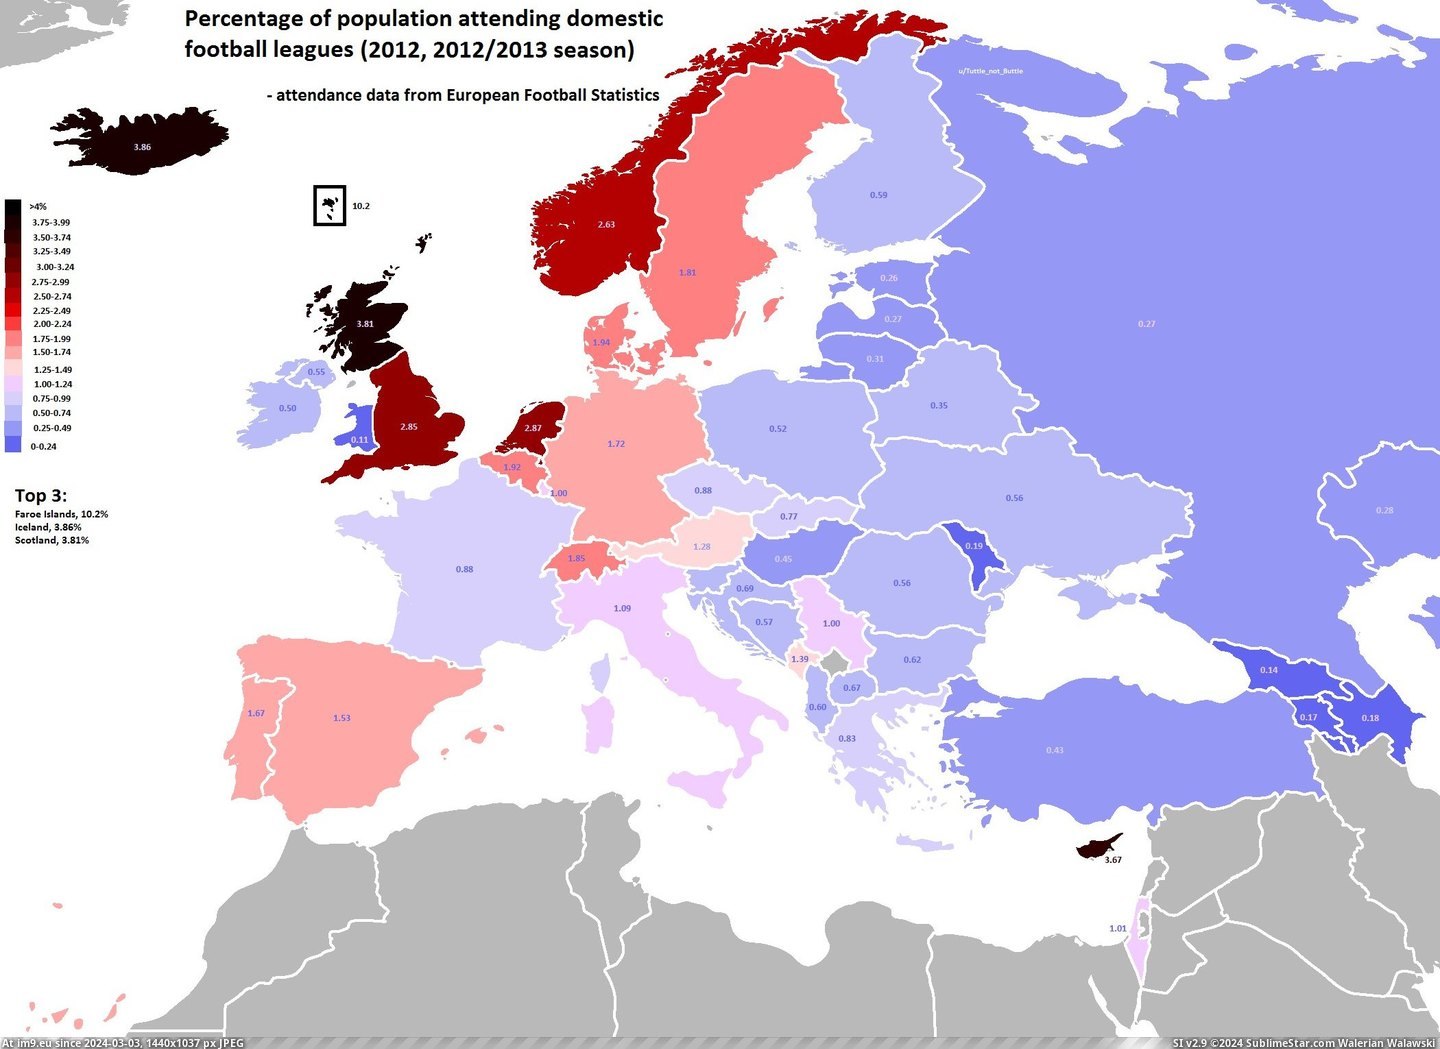 #Europe #Population #Football #2100x1525 #Domestic #Leagues #Watching #Percentage #Soccer [Mapporn] Percentage of population watching domestic football-soccer leagues in Europe. [2100x1525] Pic. (Bild von album My r/MAPS favs))